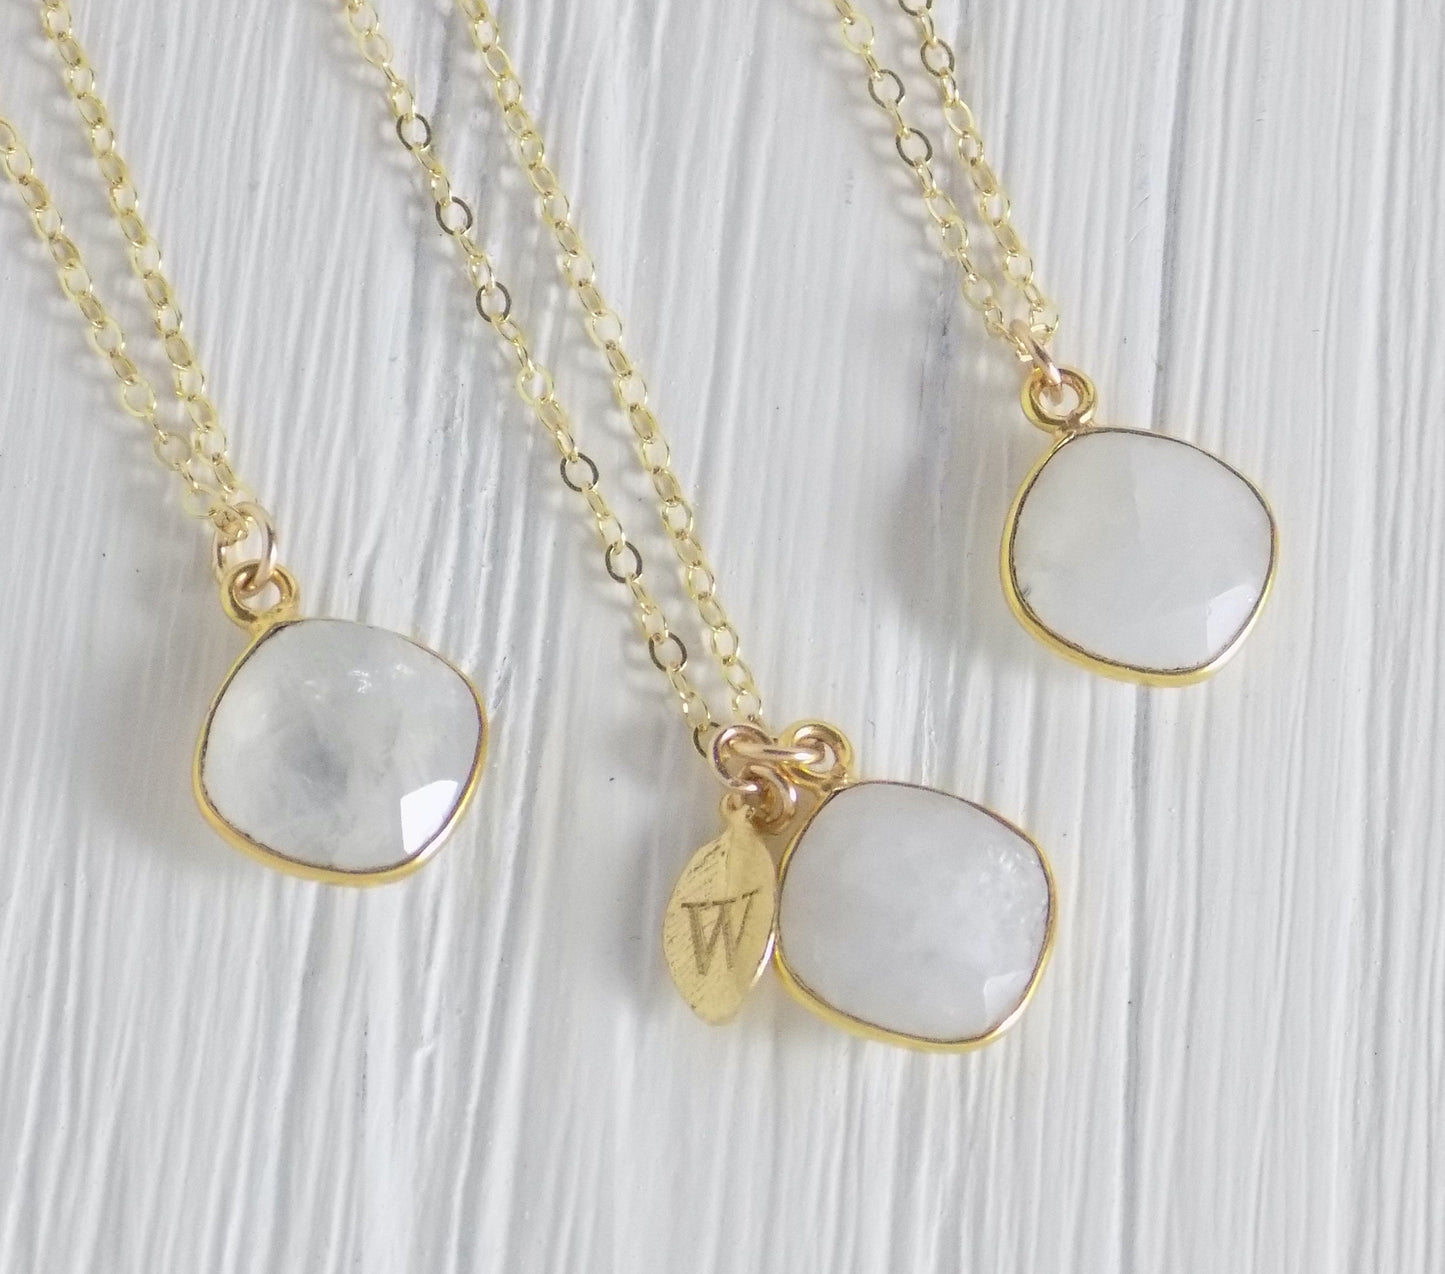 Valentines Day Gift, White Moonstone Necklace with Personalized Initial Charm on 14K Gold Filled Chain, M3-06